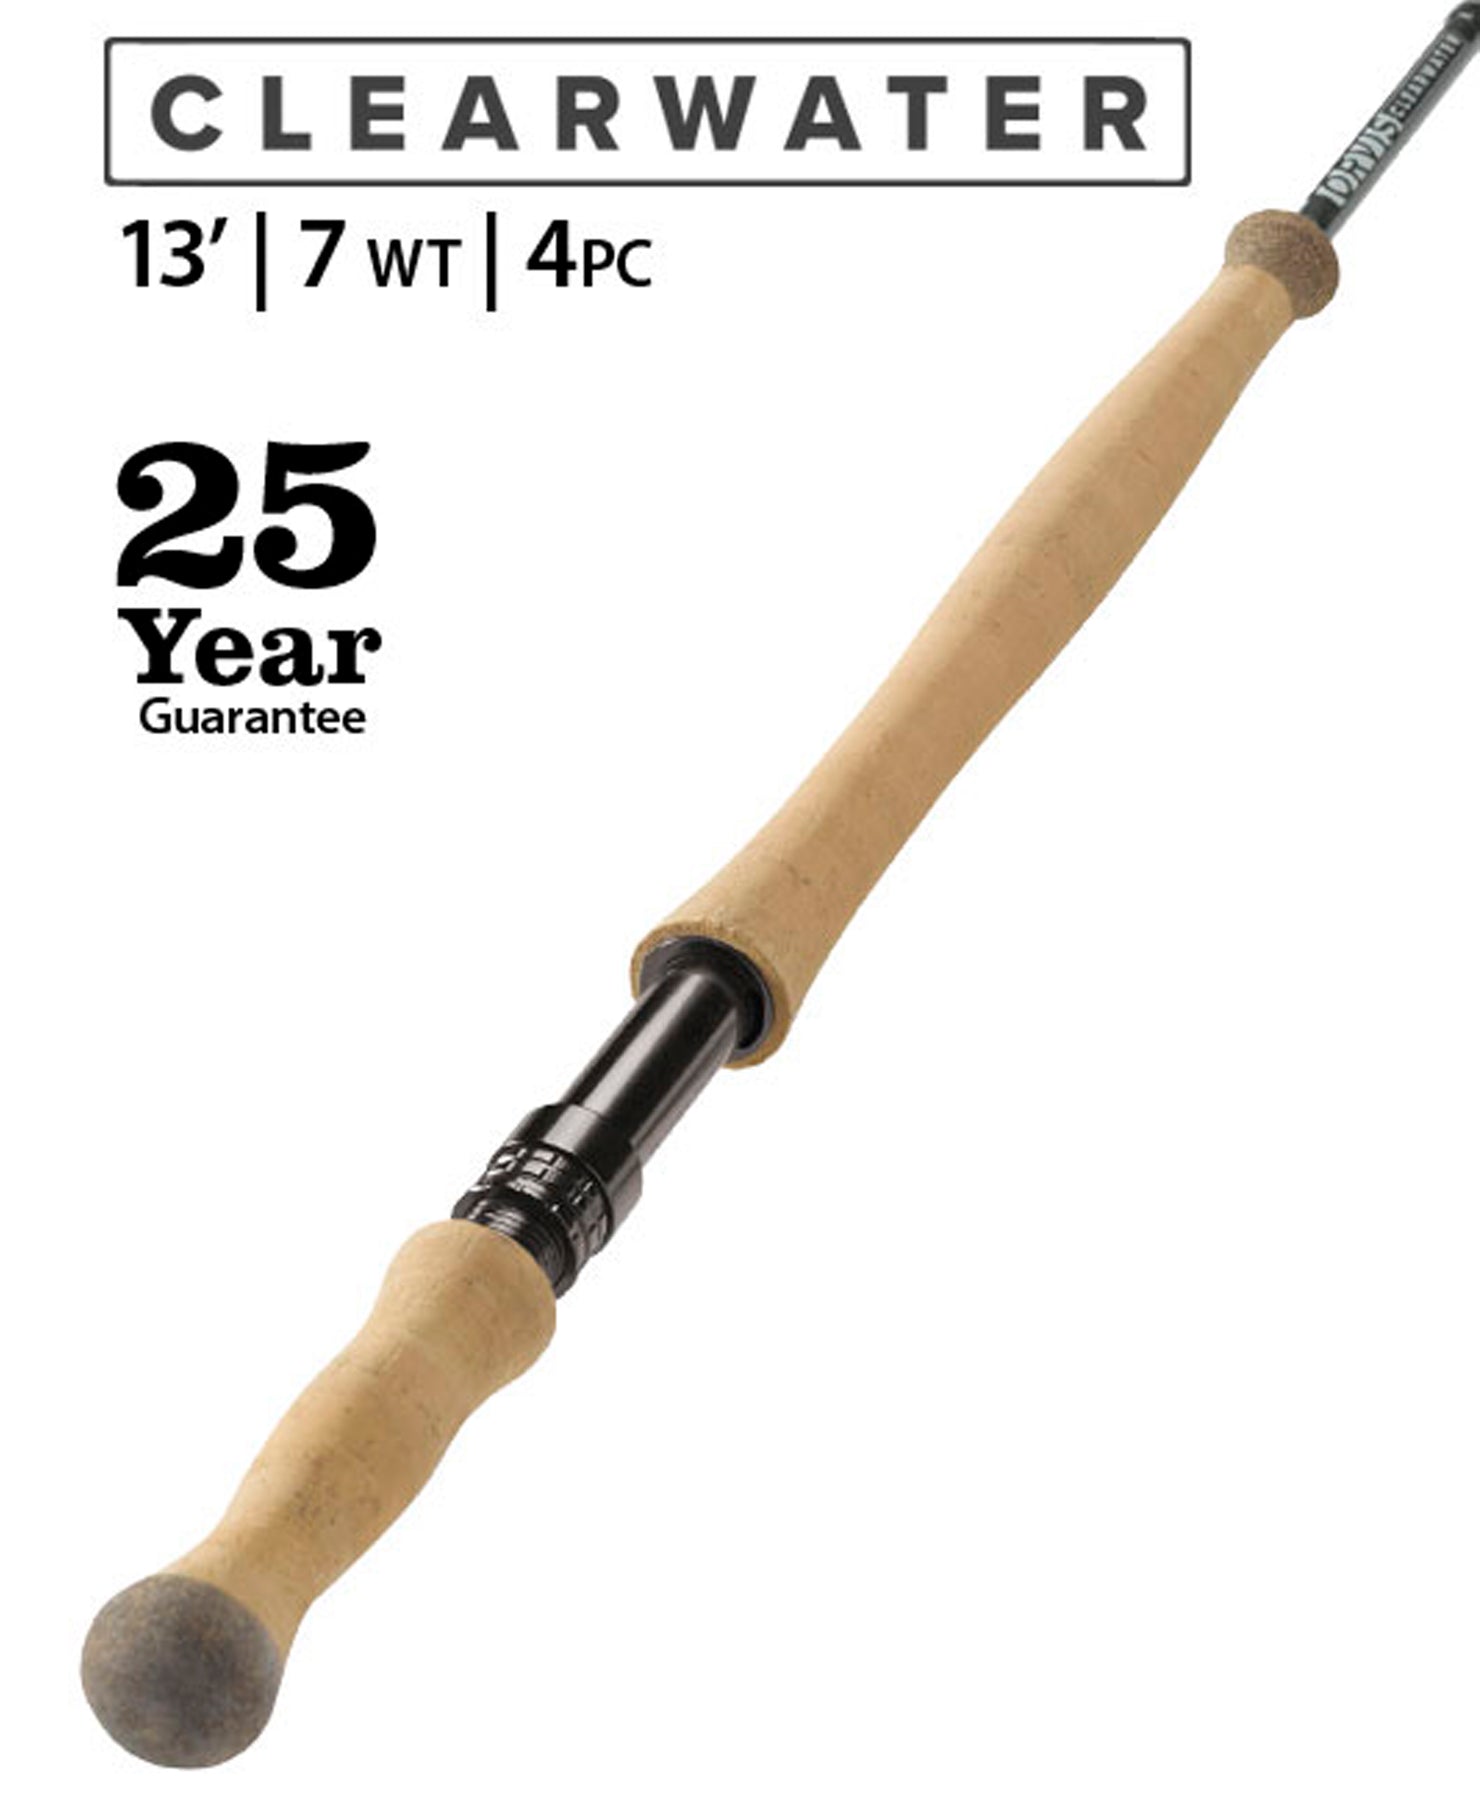 Orvis Clearwater Two-Handed Fly Rod - 13'0